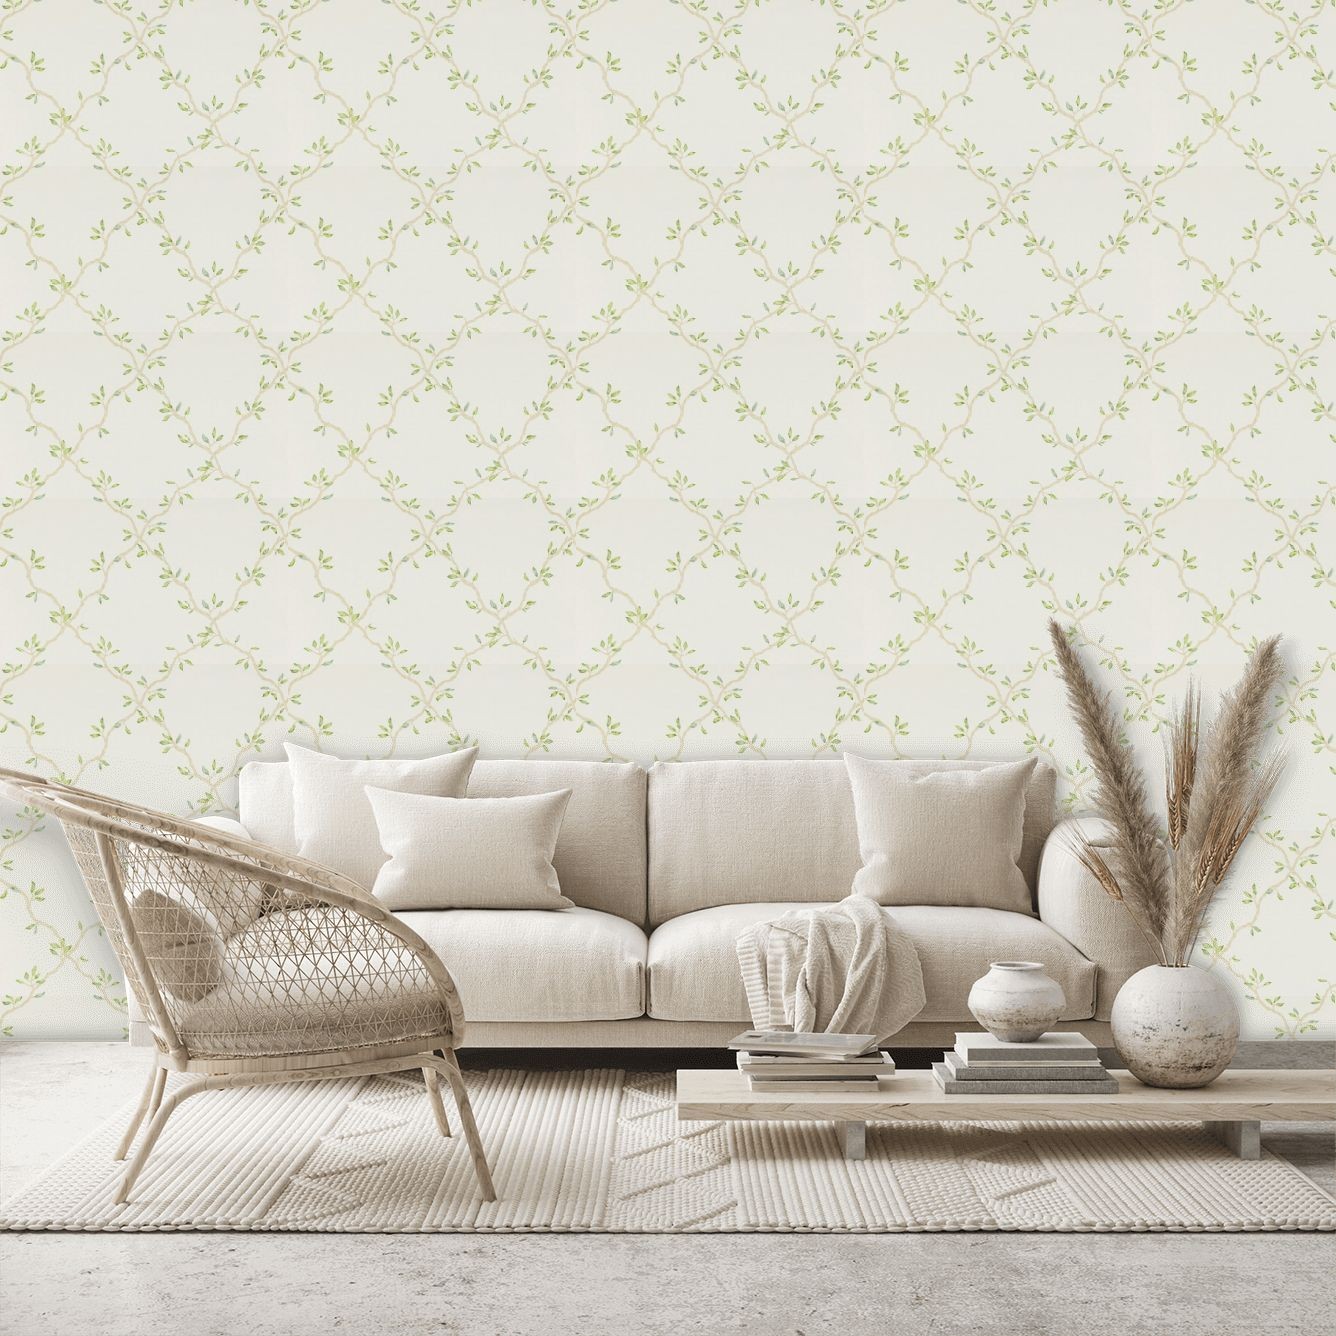 Leaf Trellis Wallpaper - Pale Green - By Colefax and Fowler - 07706/02